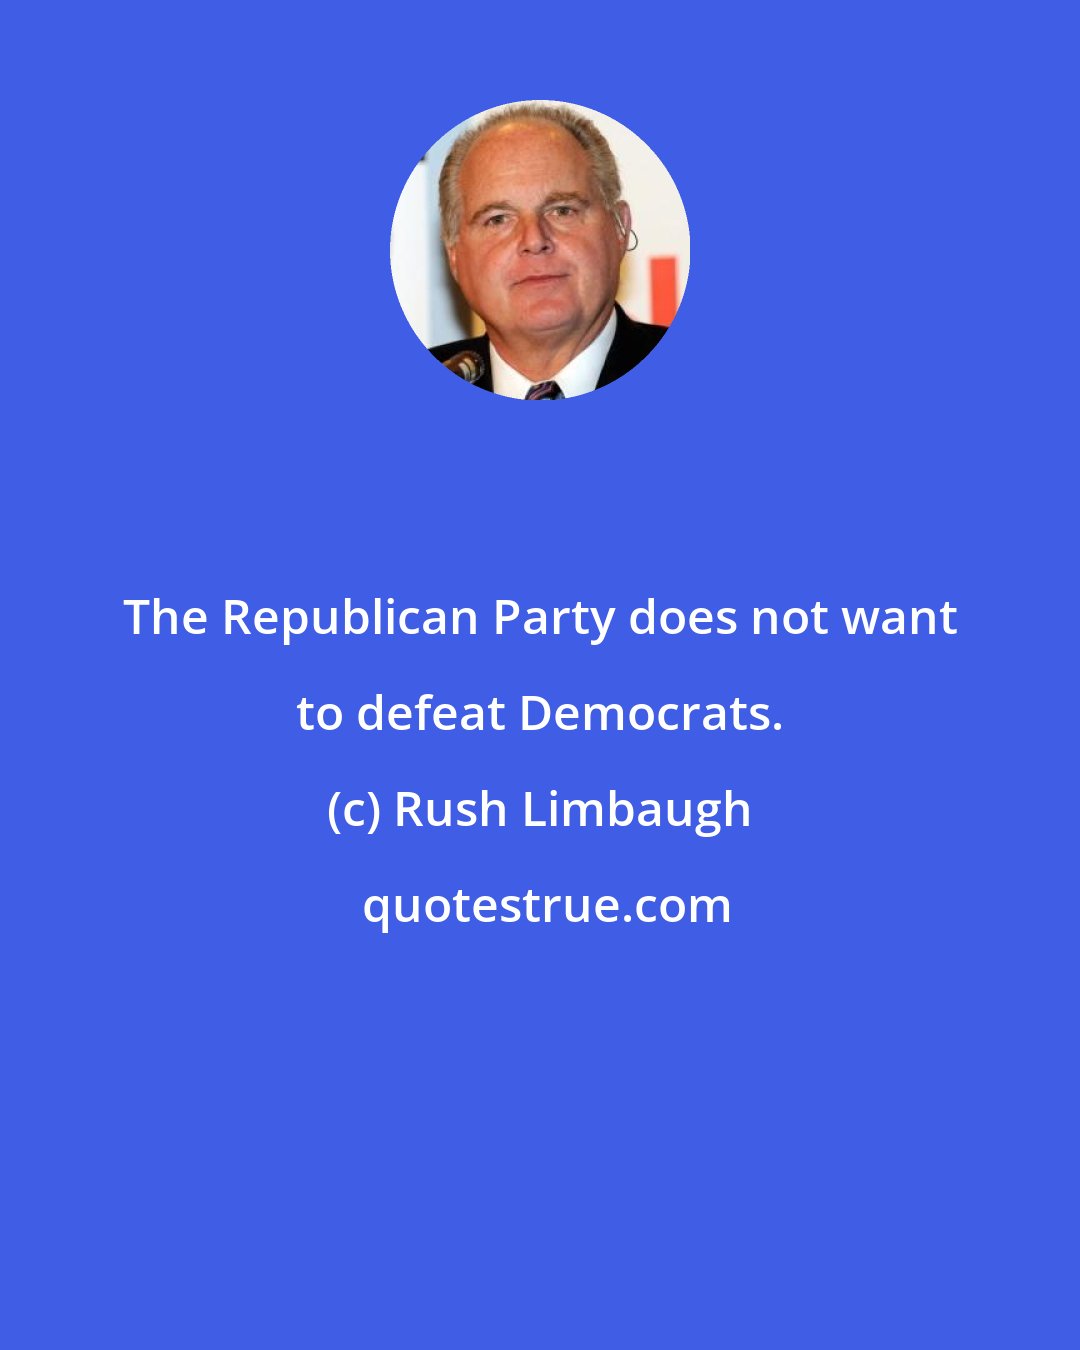 Rush Limbaugh: The Republican Party does not want to defeat Democrats.